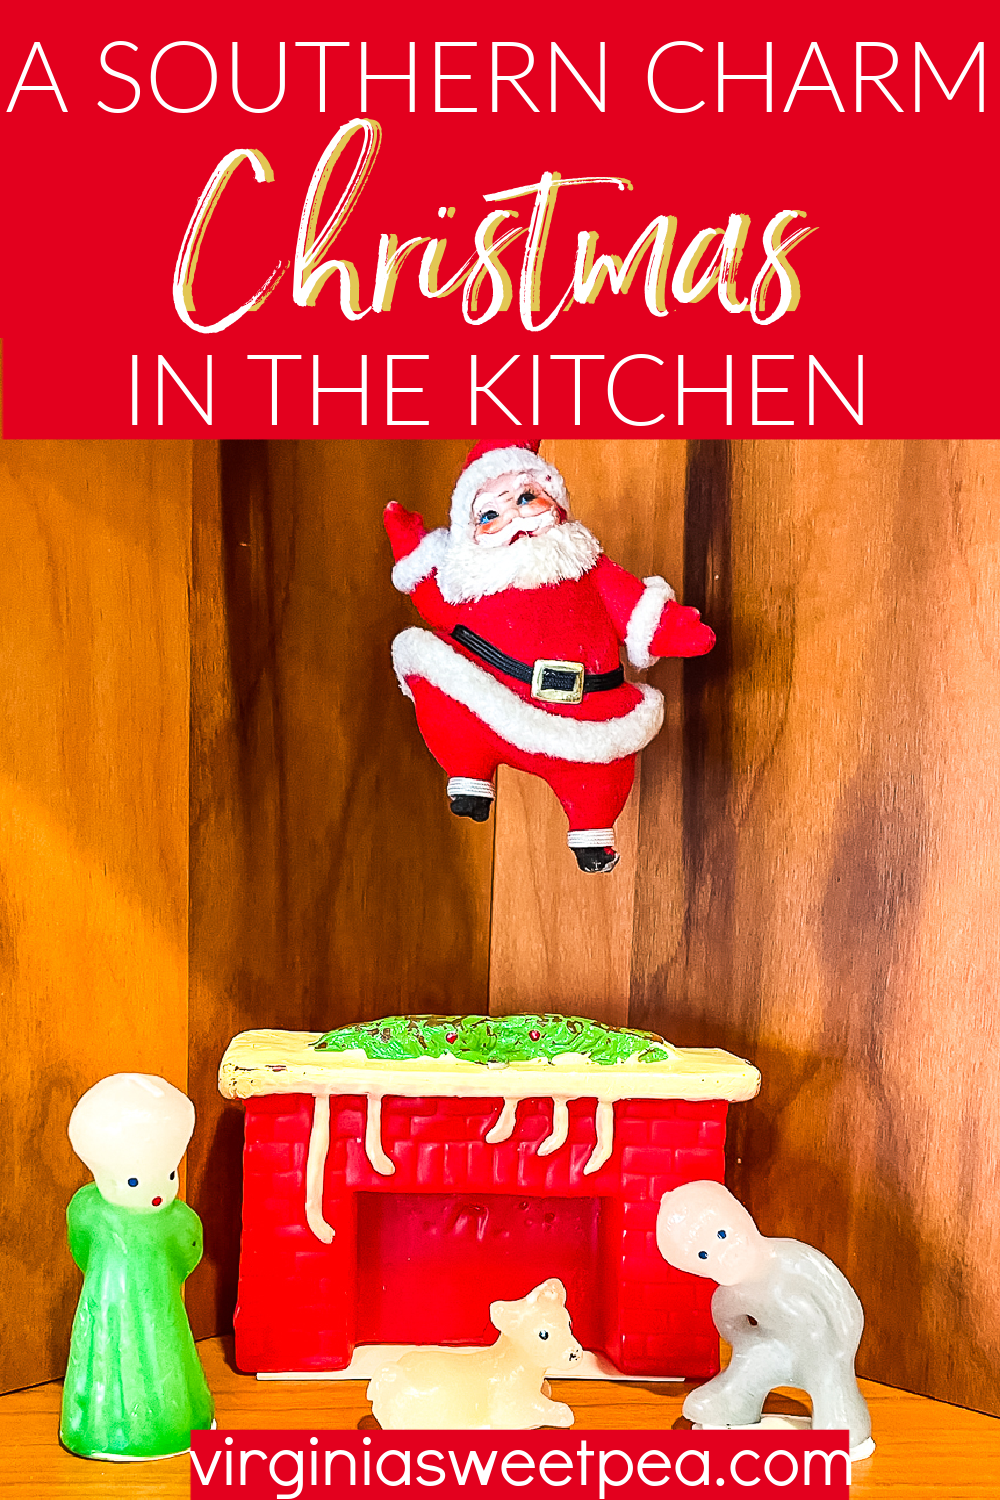 A Southern Charm Christmas in the Kitchen